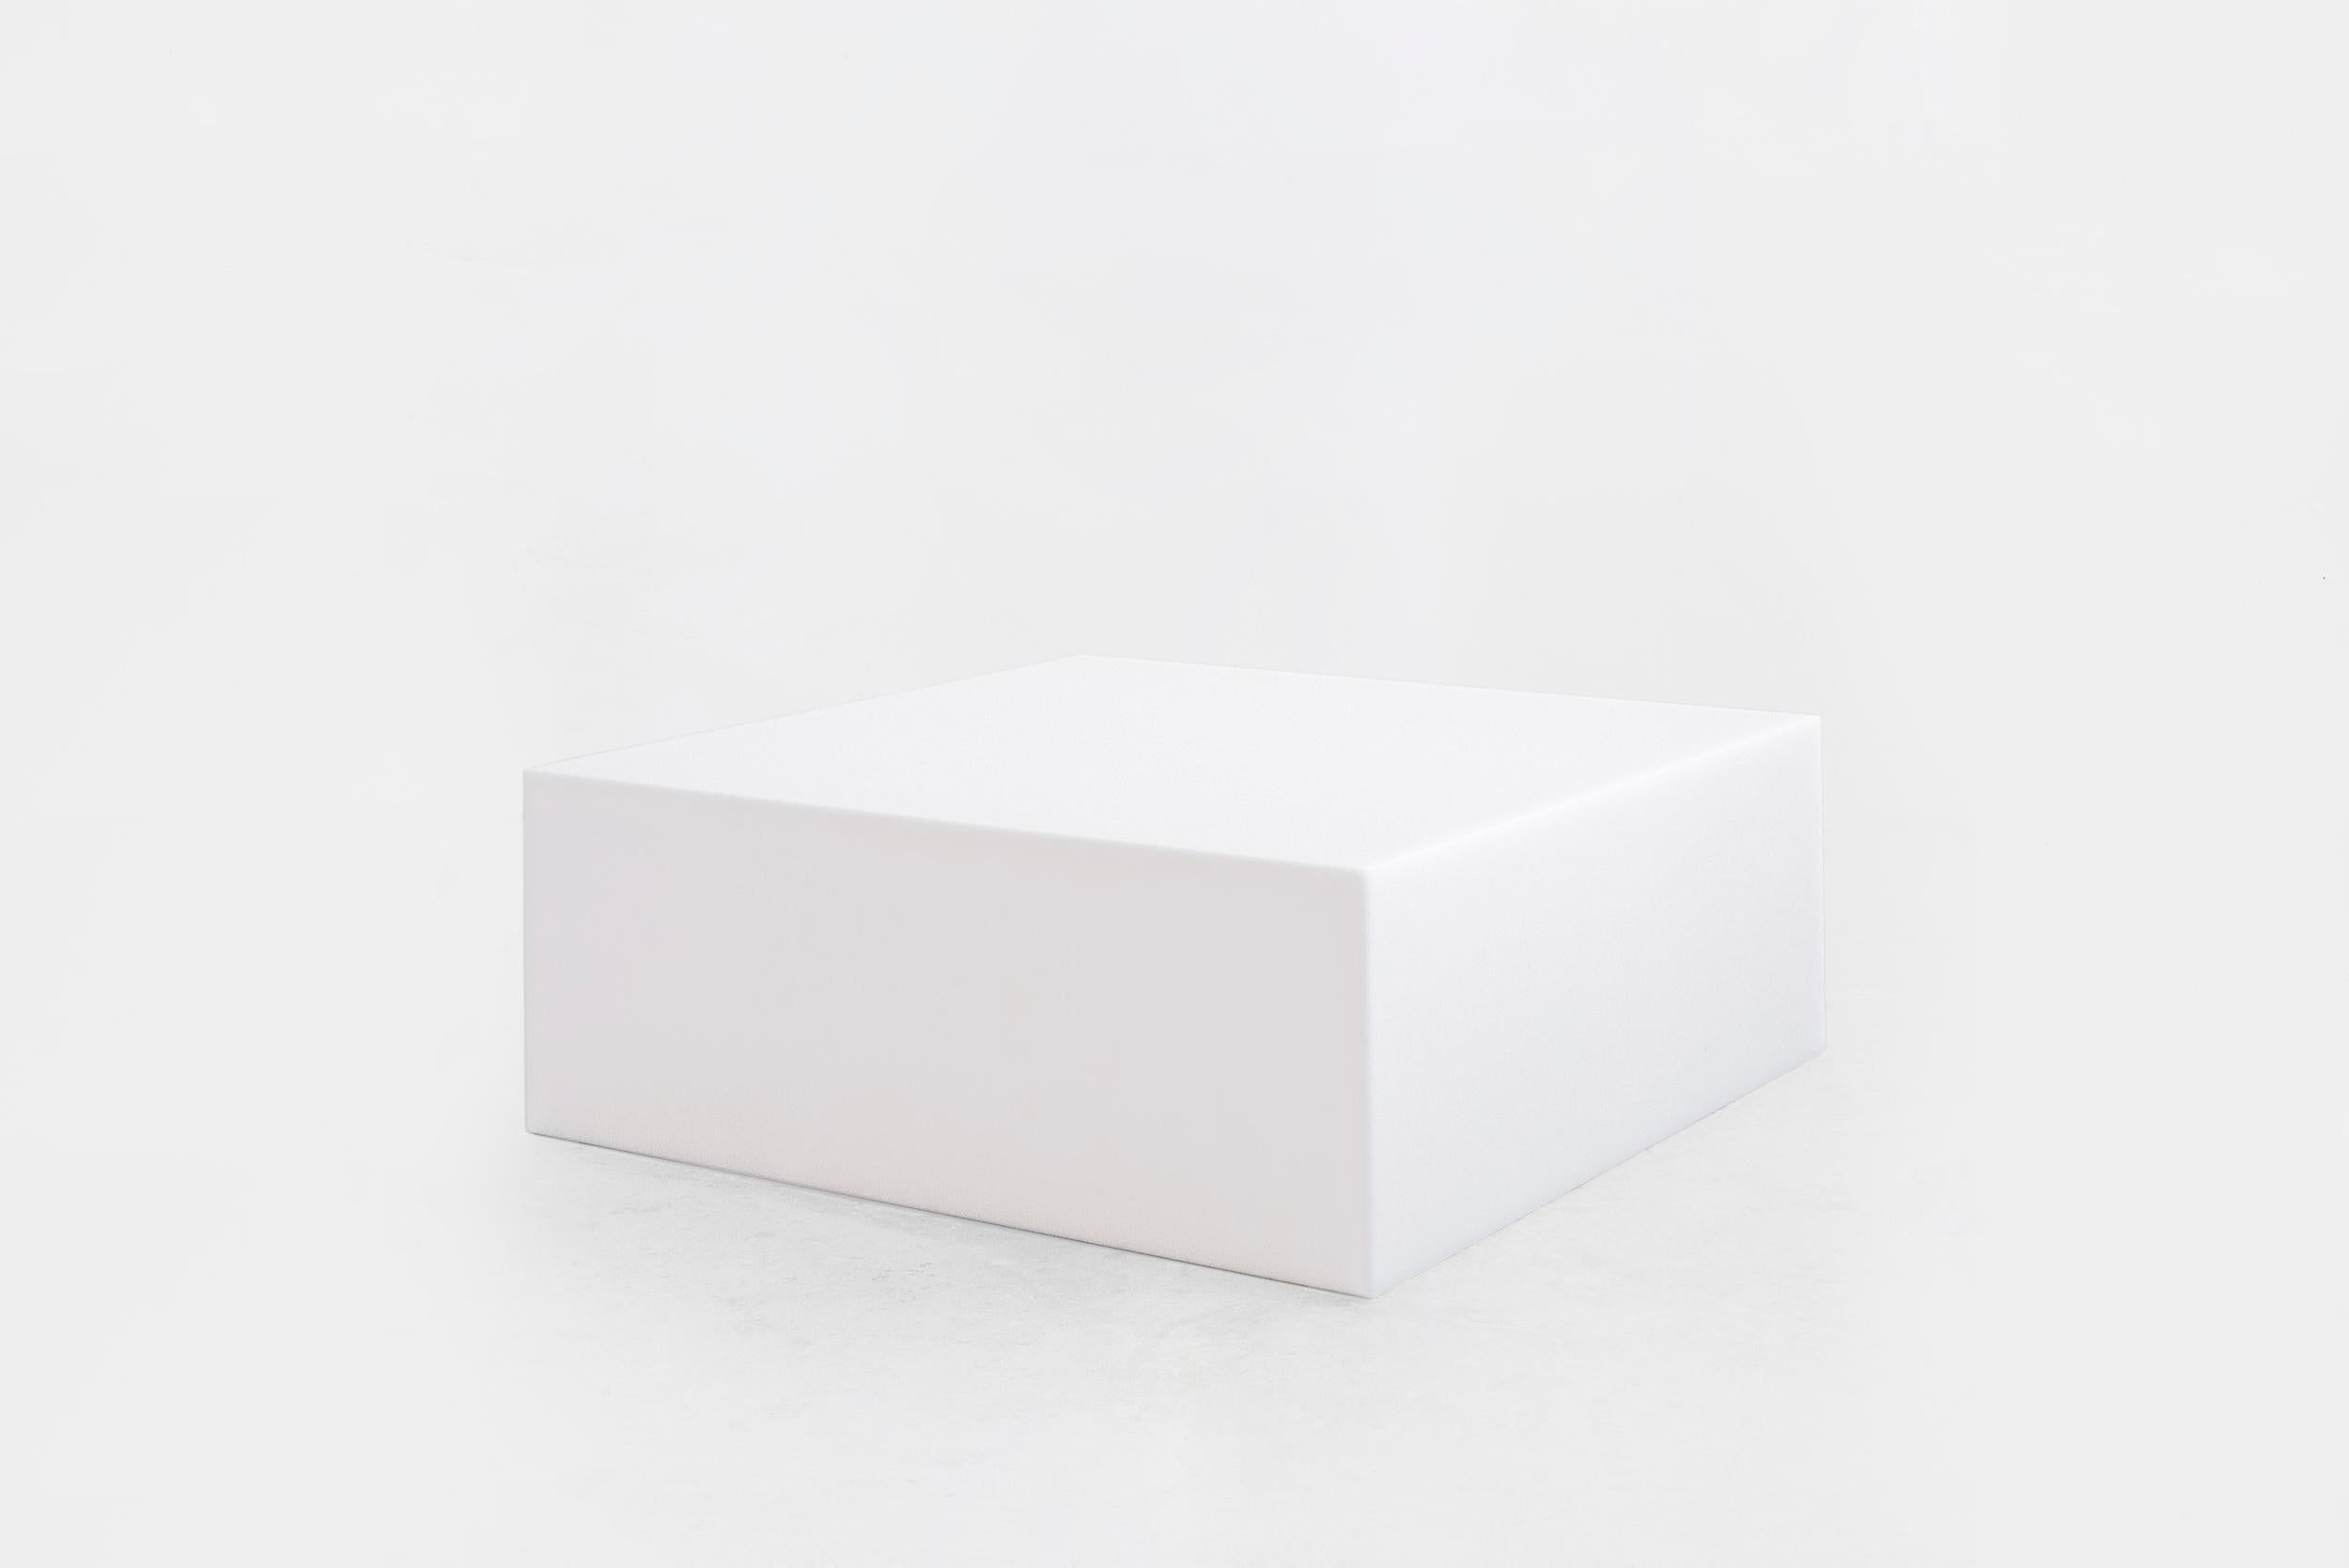 Dutch Sabine Marcelis Contemporary Coffee table, Cast Resin White, Rotterdam, 2020 For Sale